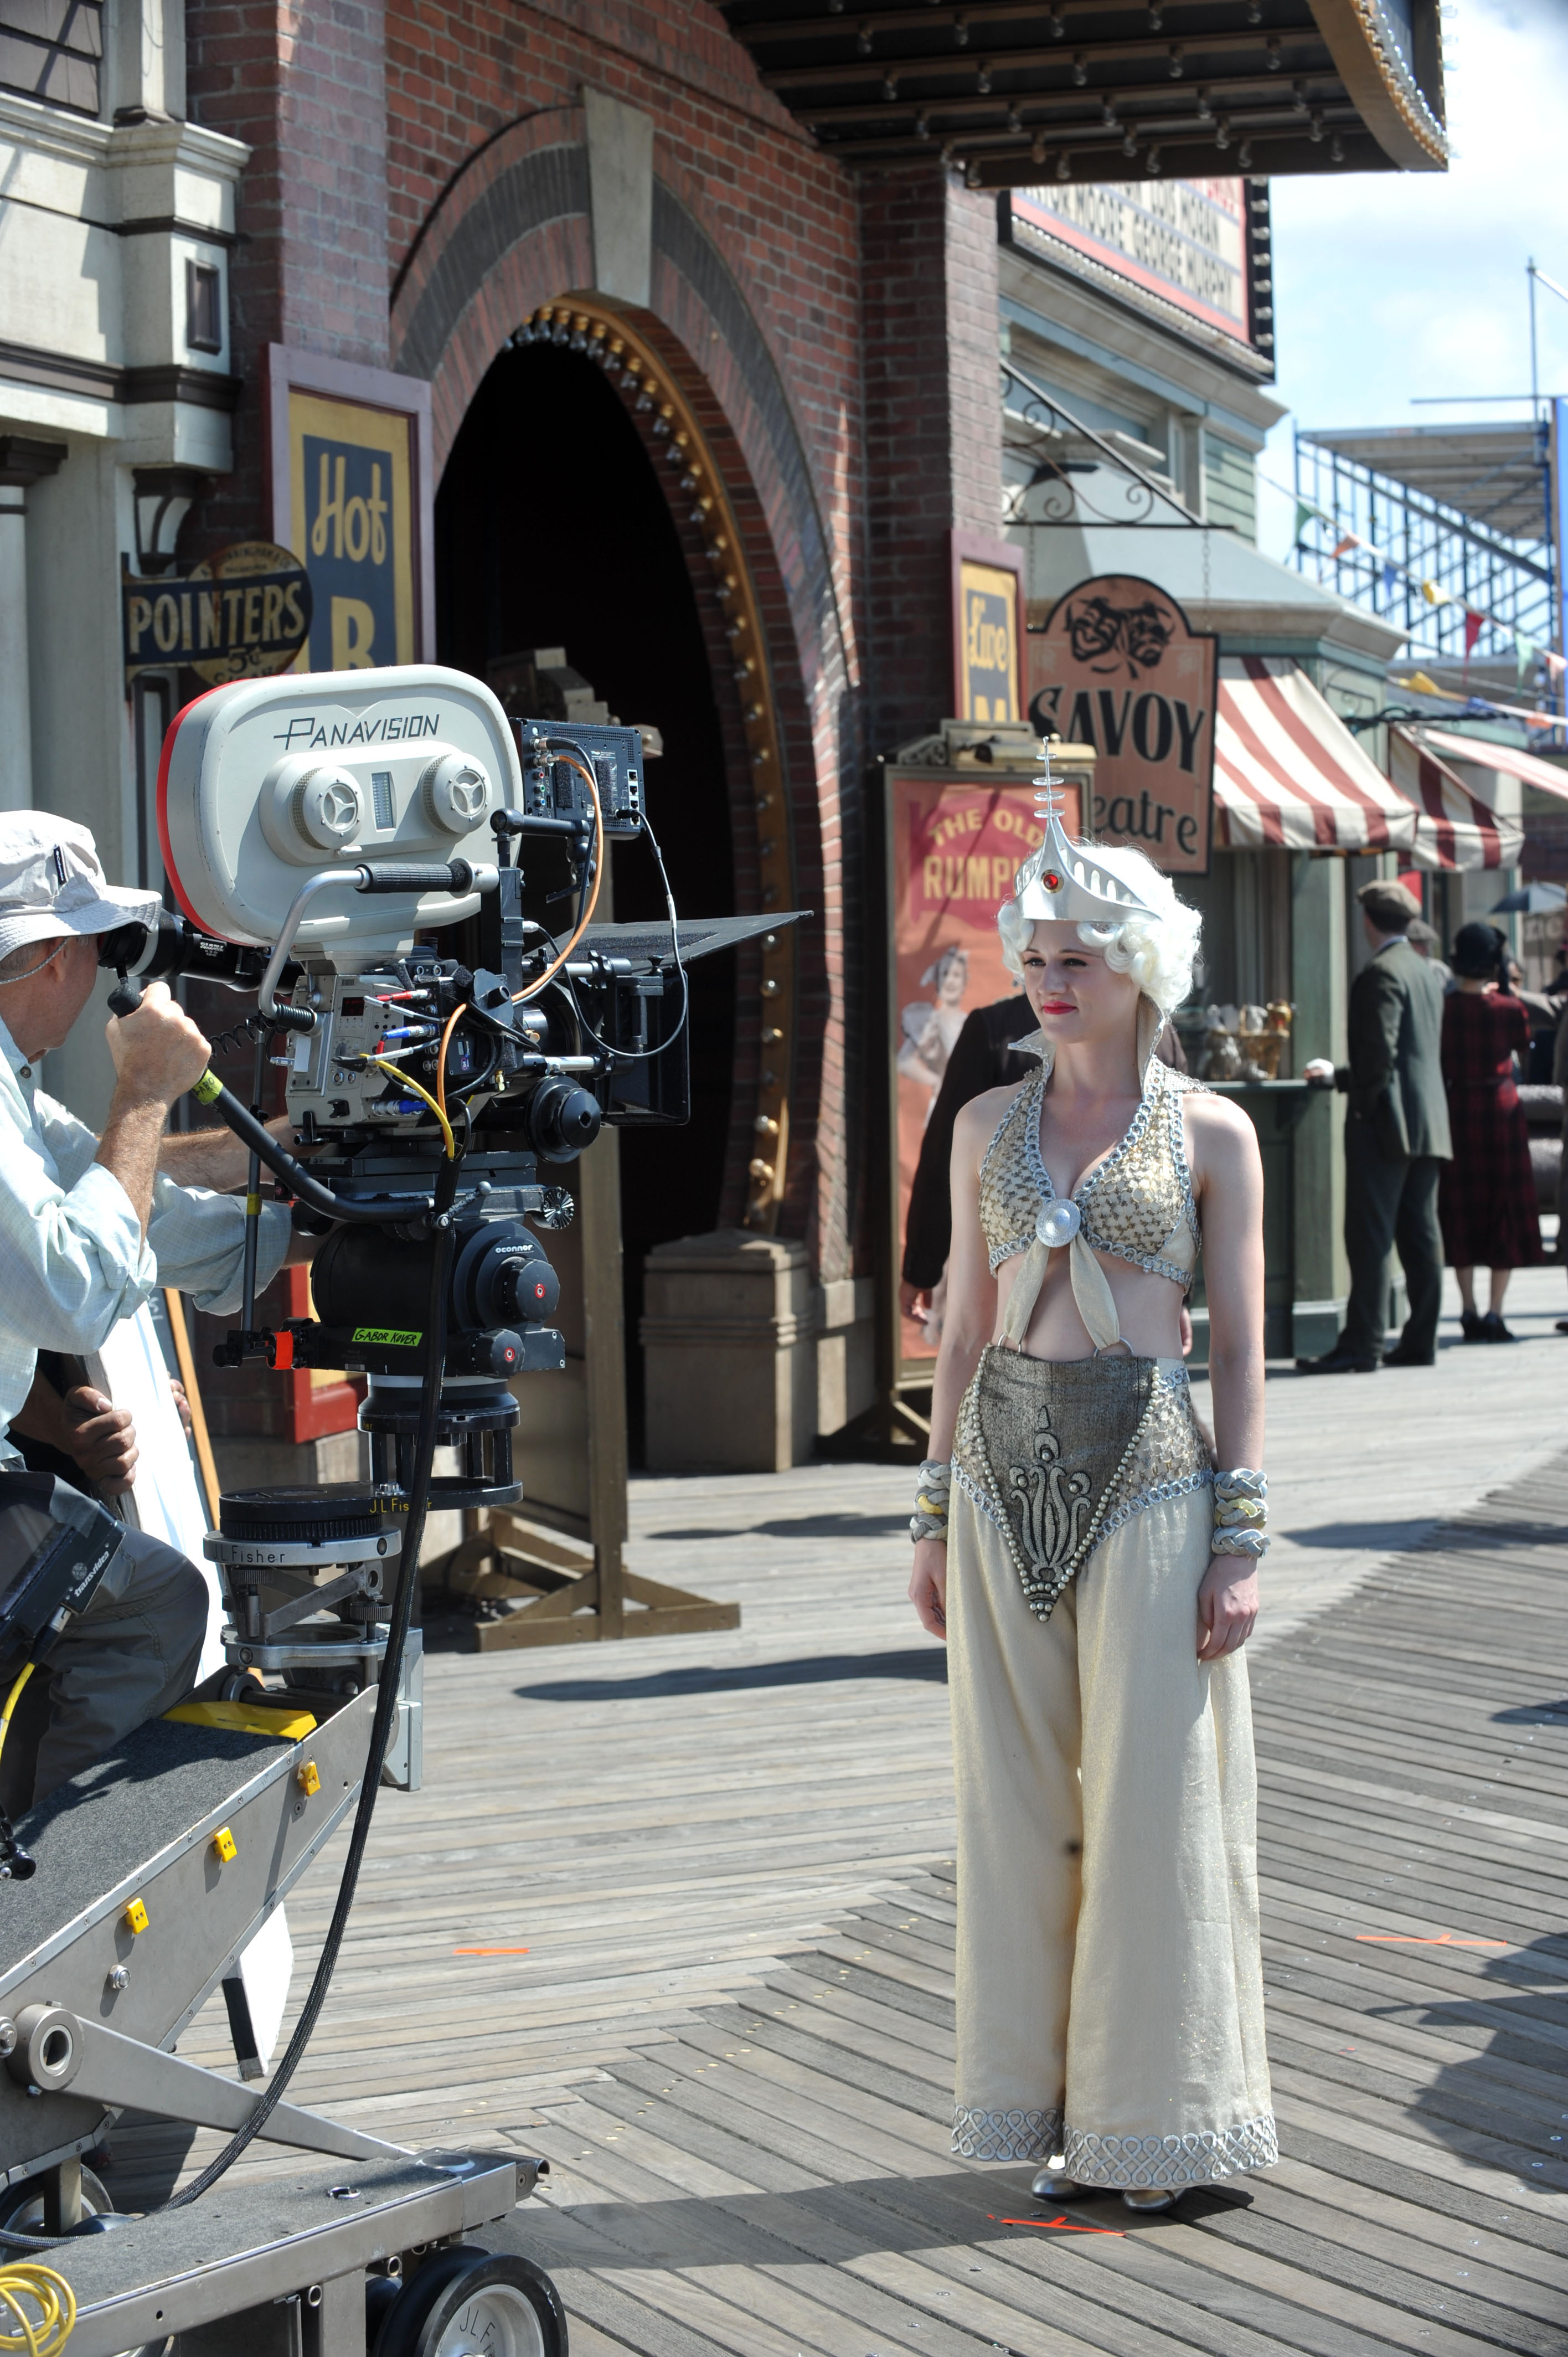 Shooting the series finale of HBO's Boardwalk Empire.